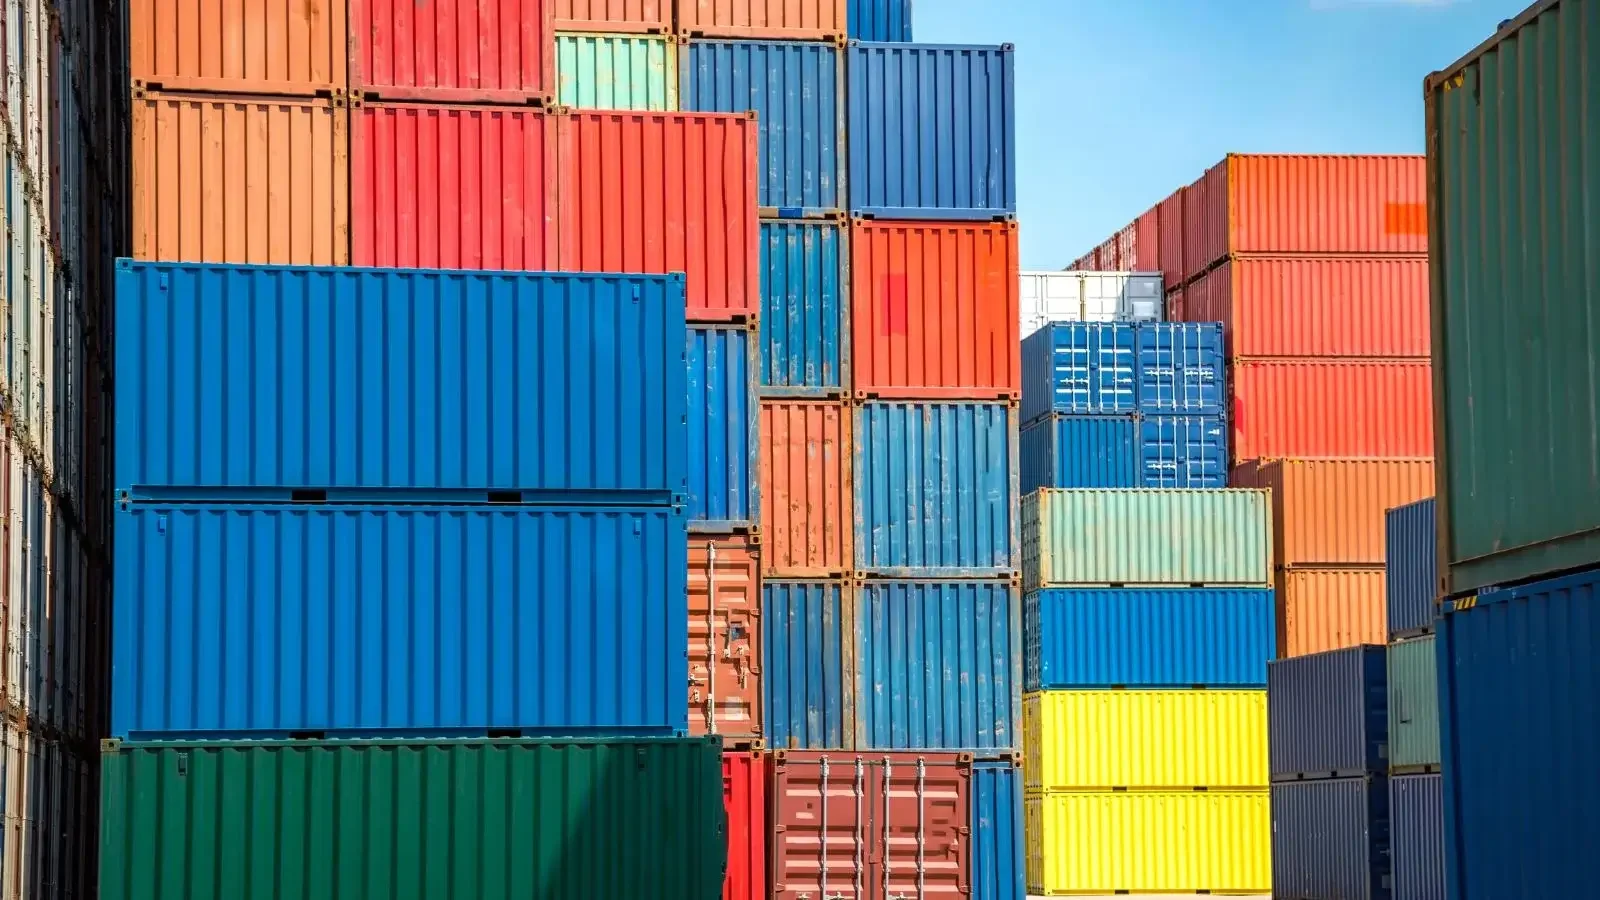 Painting Shipping Containers 101: How to Paint a Shipping Container